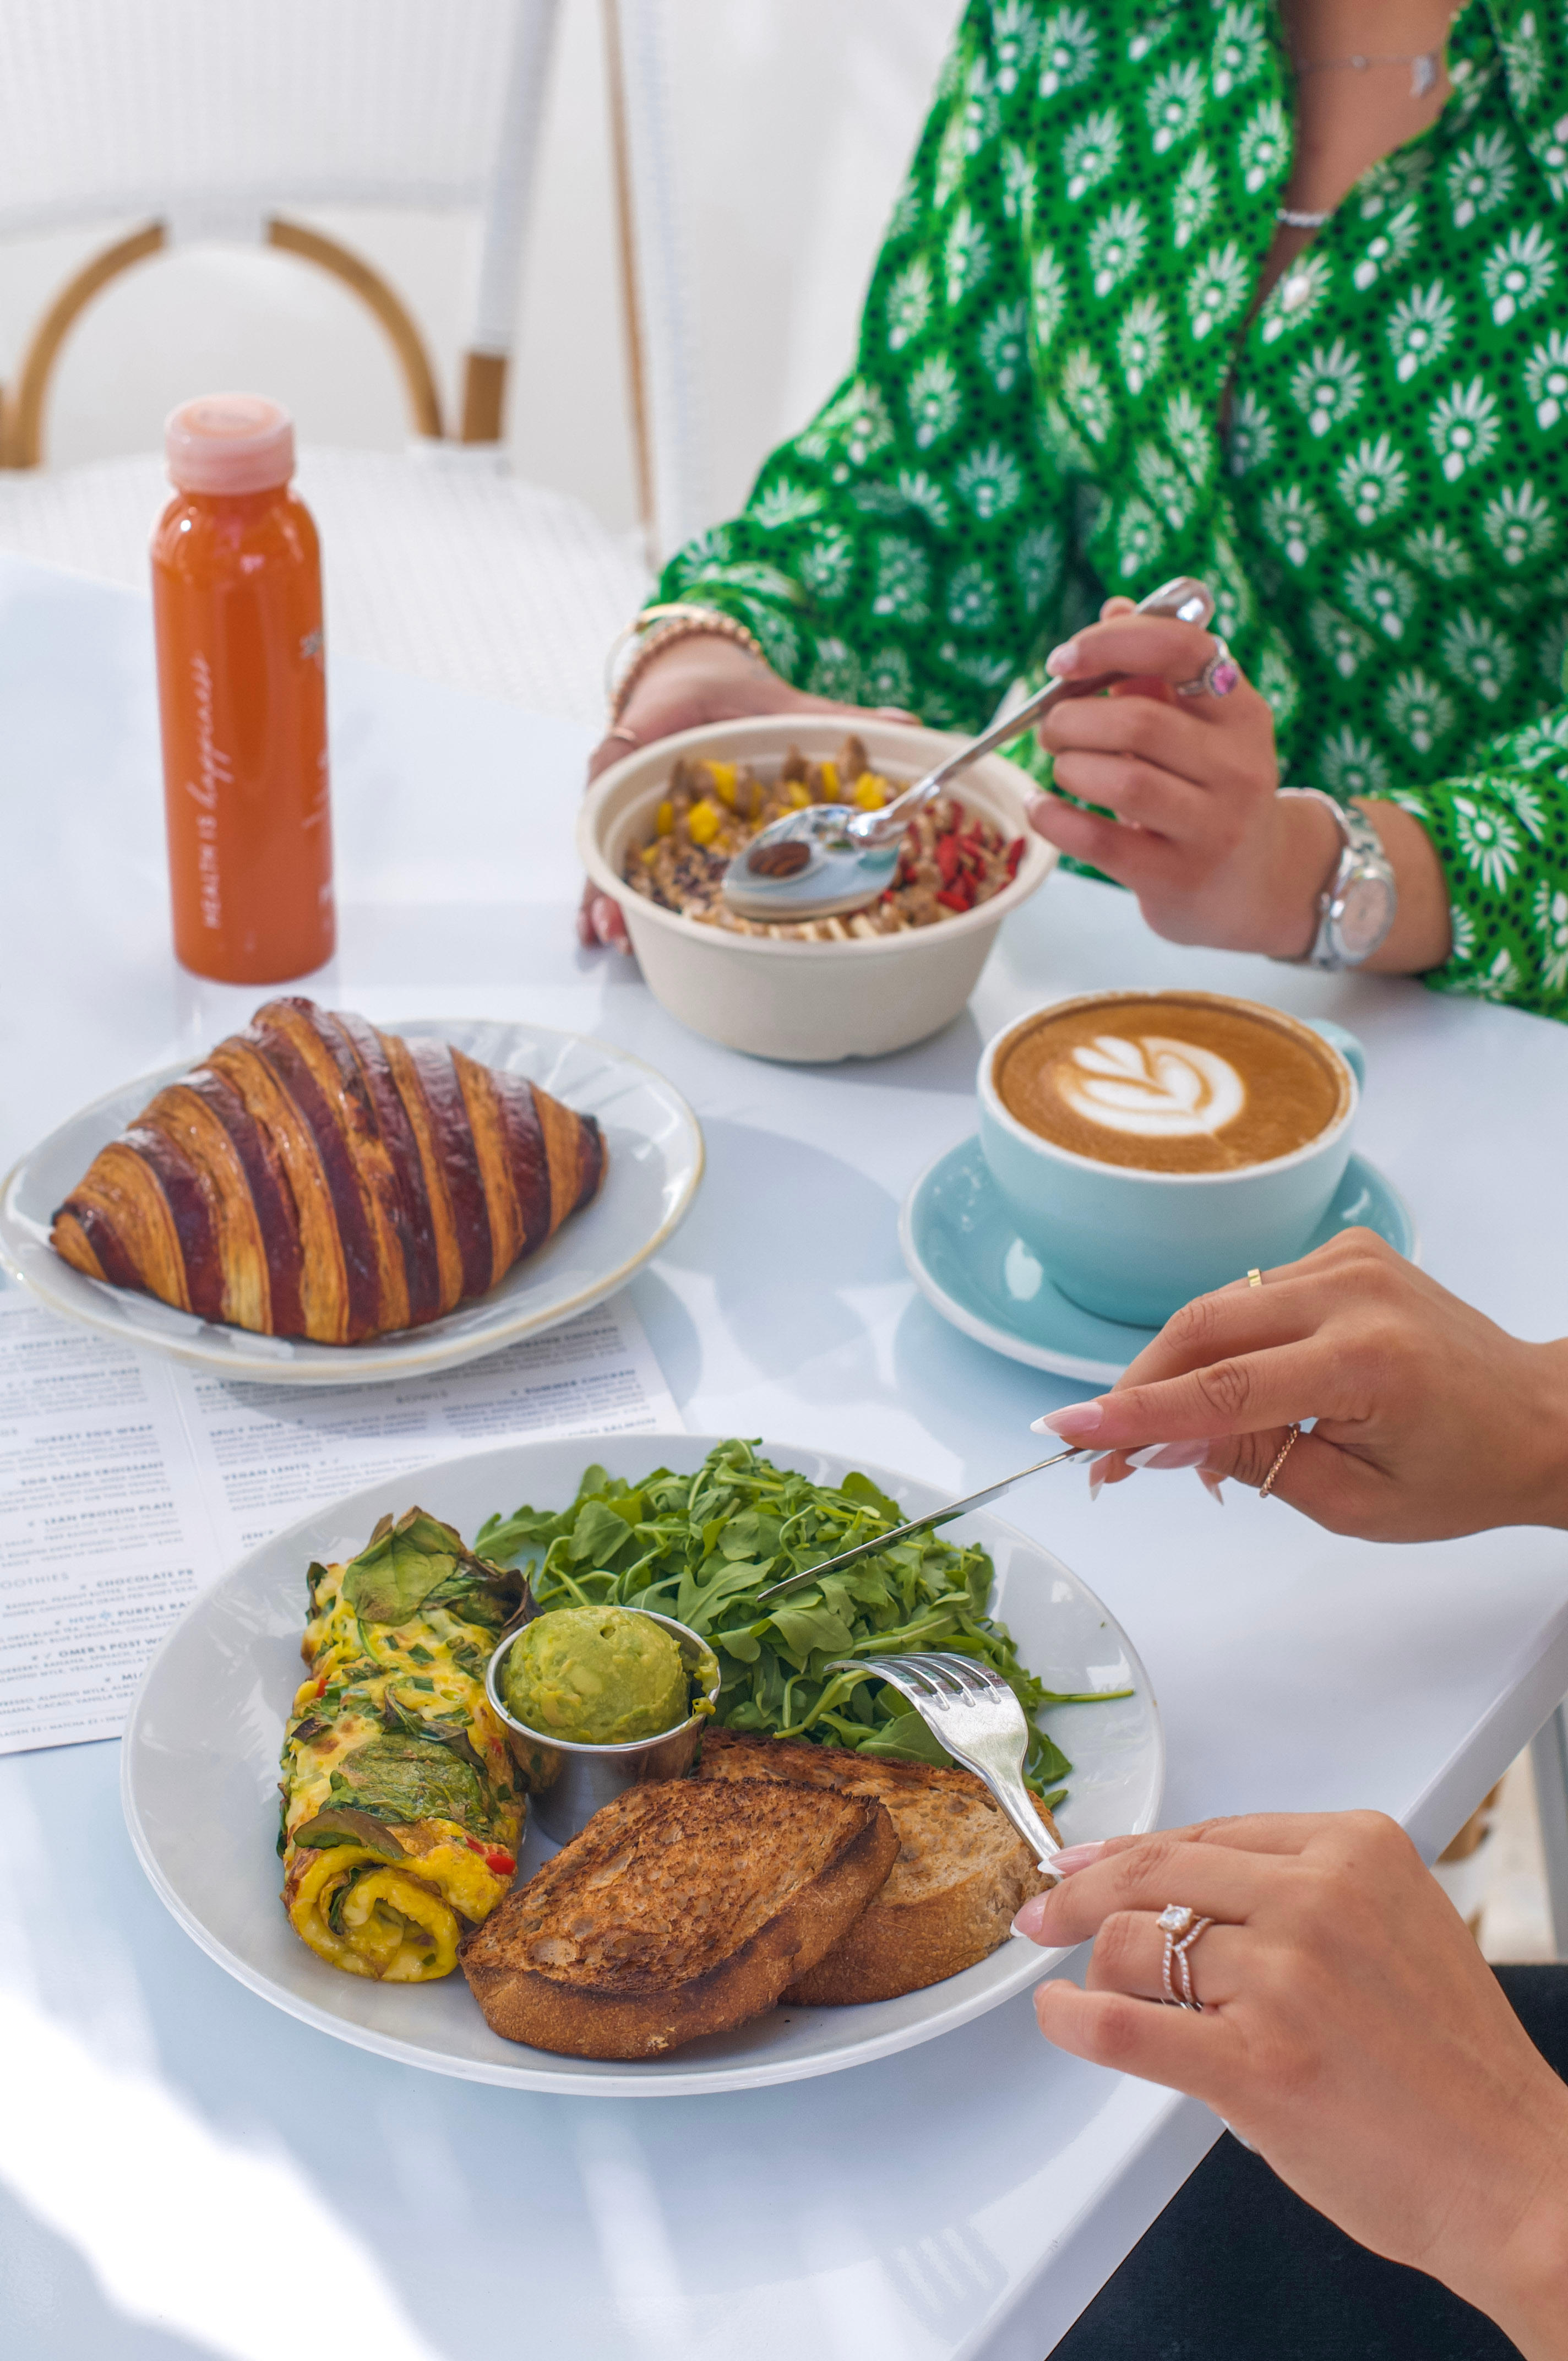 Perfect Brunch ft veggie omelette, freshly baked croissant, acai bowls, coffees, juices